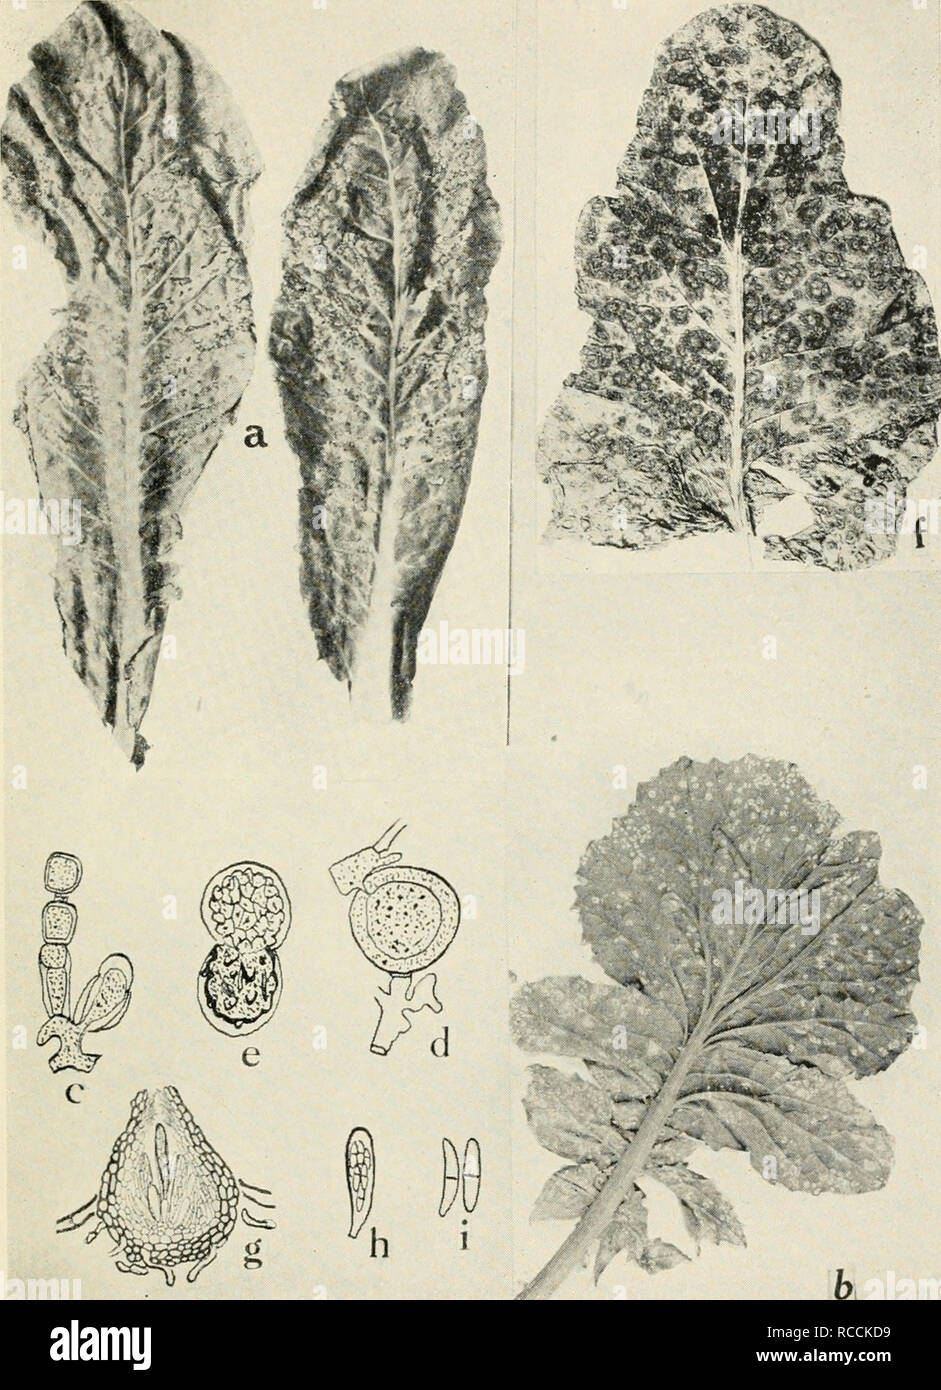 . Diseases of truck crops and their control. Plants -- Diseases. Fig. 33. Diseases of the Cauliflower and Radish. a. Spot disease of cauliflower (after McCuUoch), b. white rust of radish, c. conidio- phore of the white rust fungus, Cystopus candidus, d. fertilization in Albugo Candida, e. germination of the oospore of Albugo Candida, f. ring spot on cauliflower head. g. perithecium of Mycosphcerella brassicicola, h. ascus of MycosphcrrcUa brassicicola, i. ascospores of Mycosphmrella brassicicola (g. to i. after Osmun and Anderson).. Please note that these images are extracted from scanned page Stock Photo